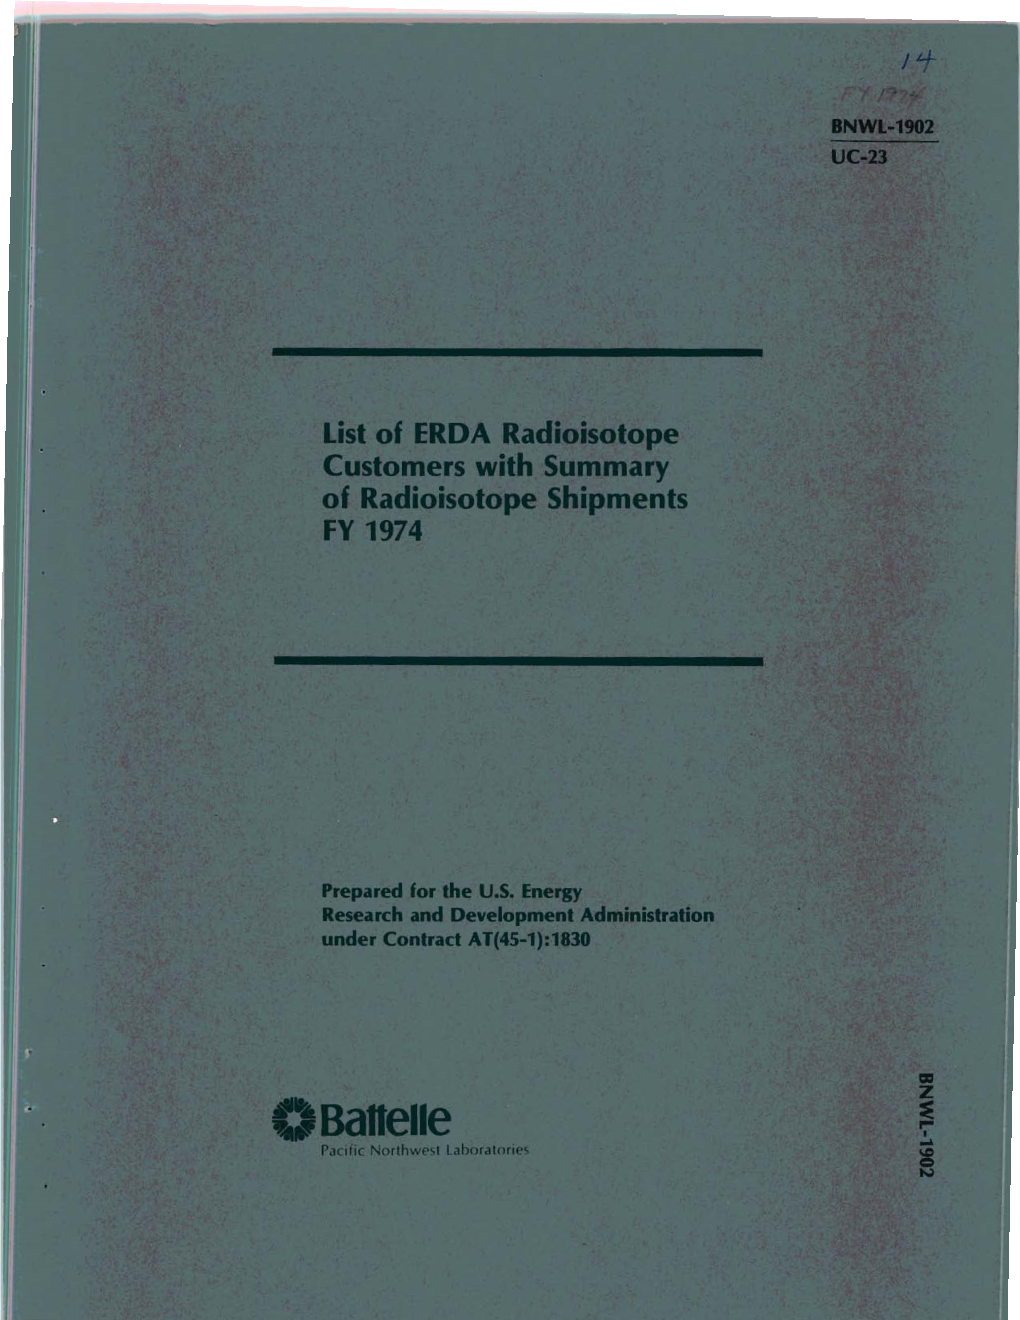 List of Erda Radioisotope Customers with Summary of Radioisotope Shipments Fy-1974